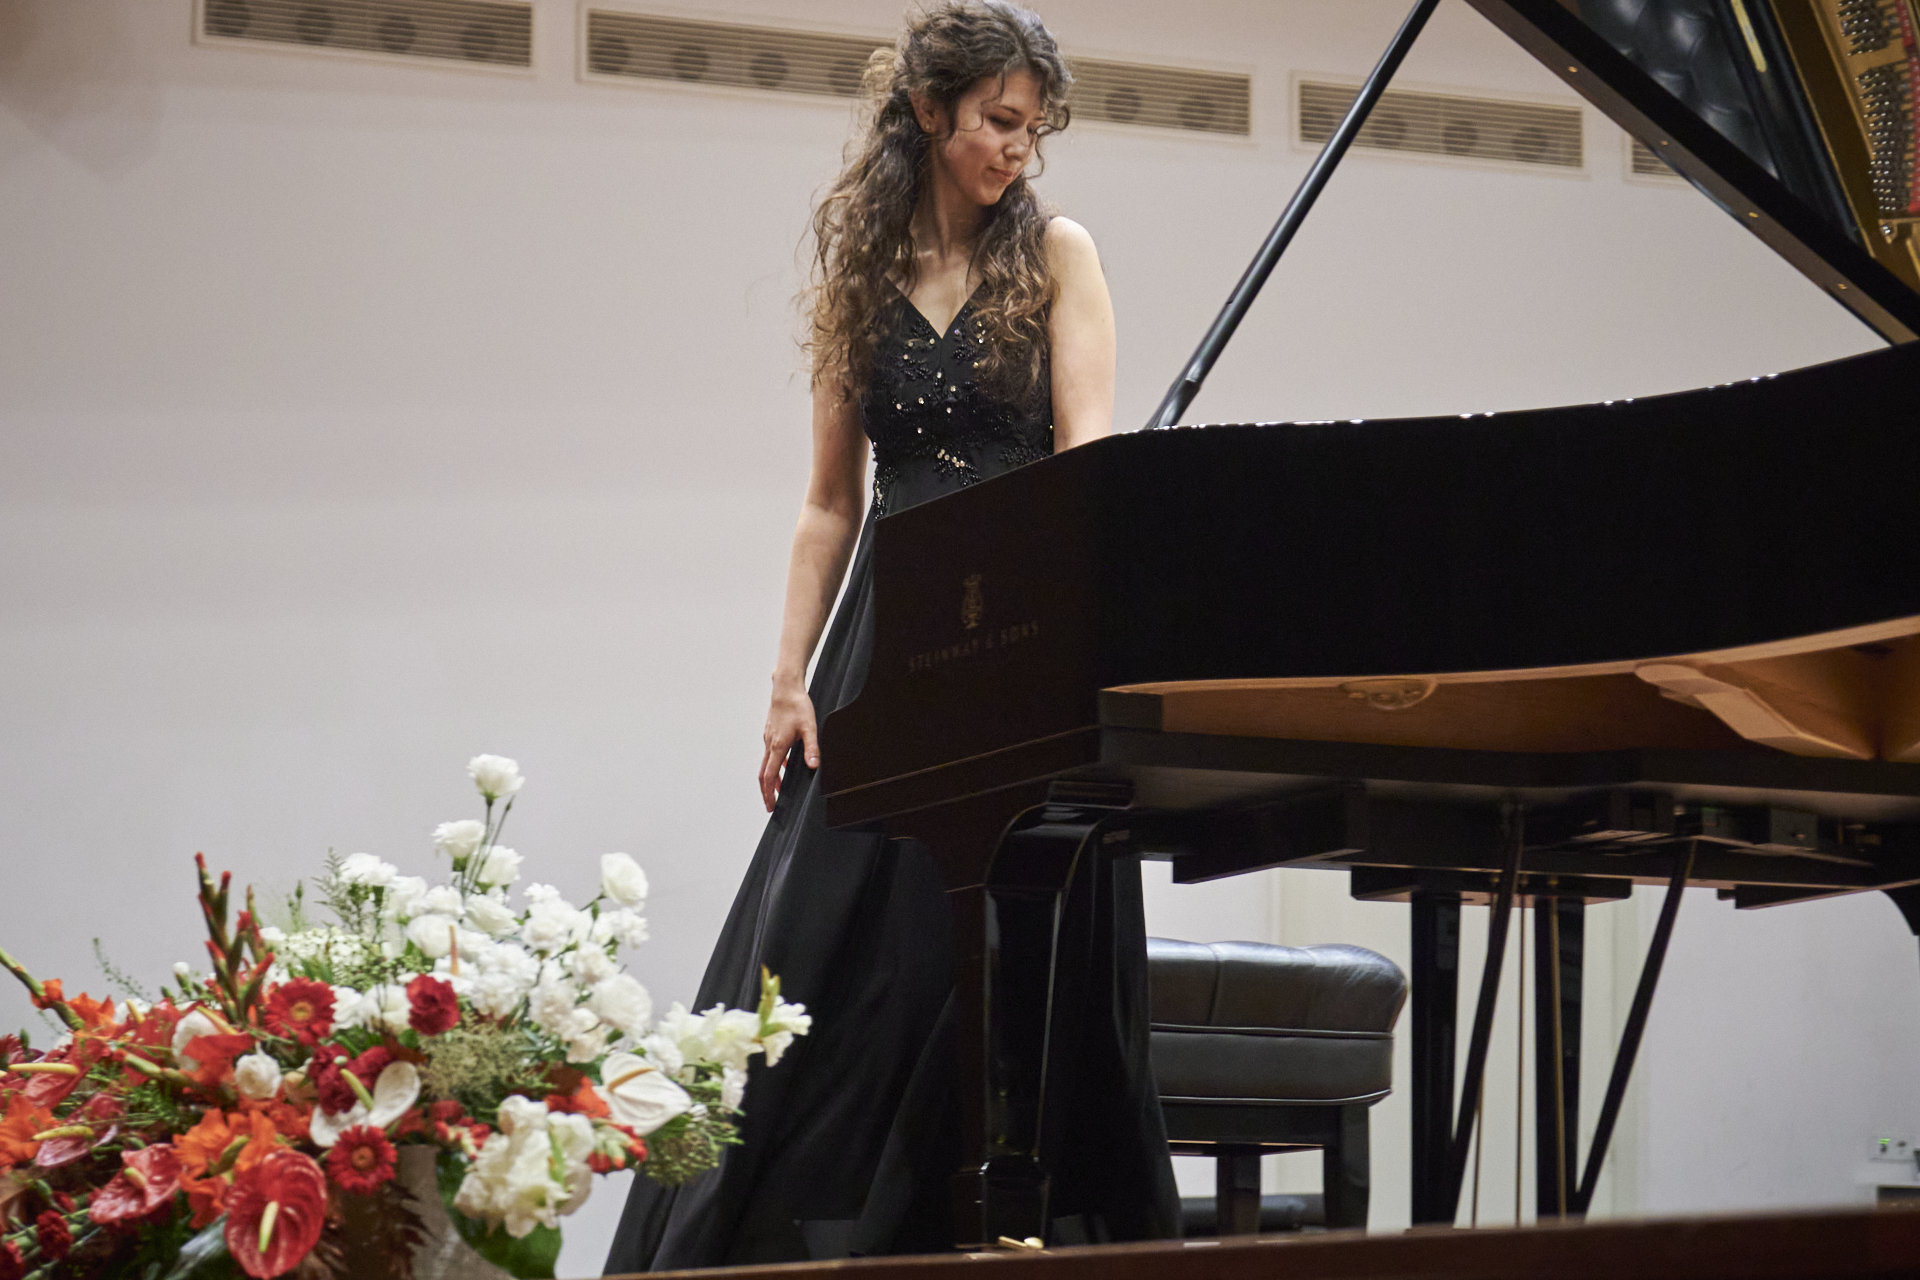 A lady in a long black dress looking down at a grand piano, with flowers in the foreground